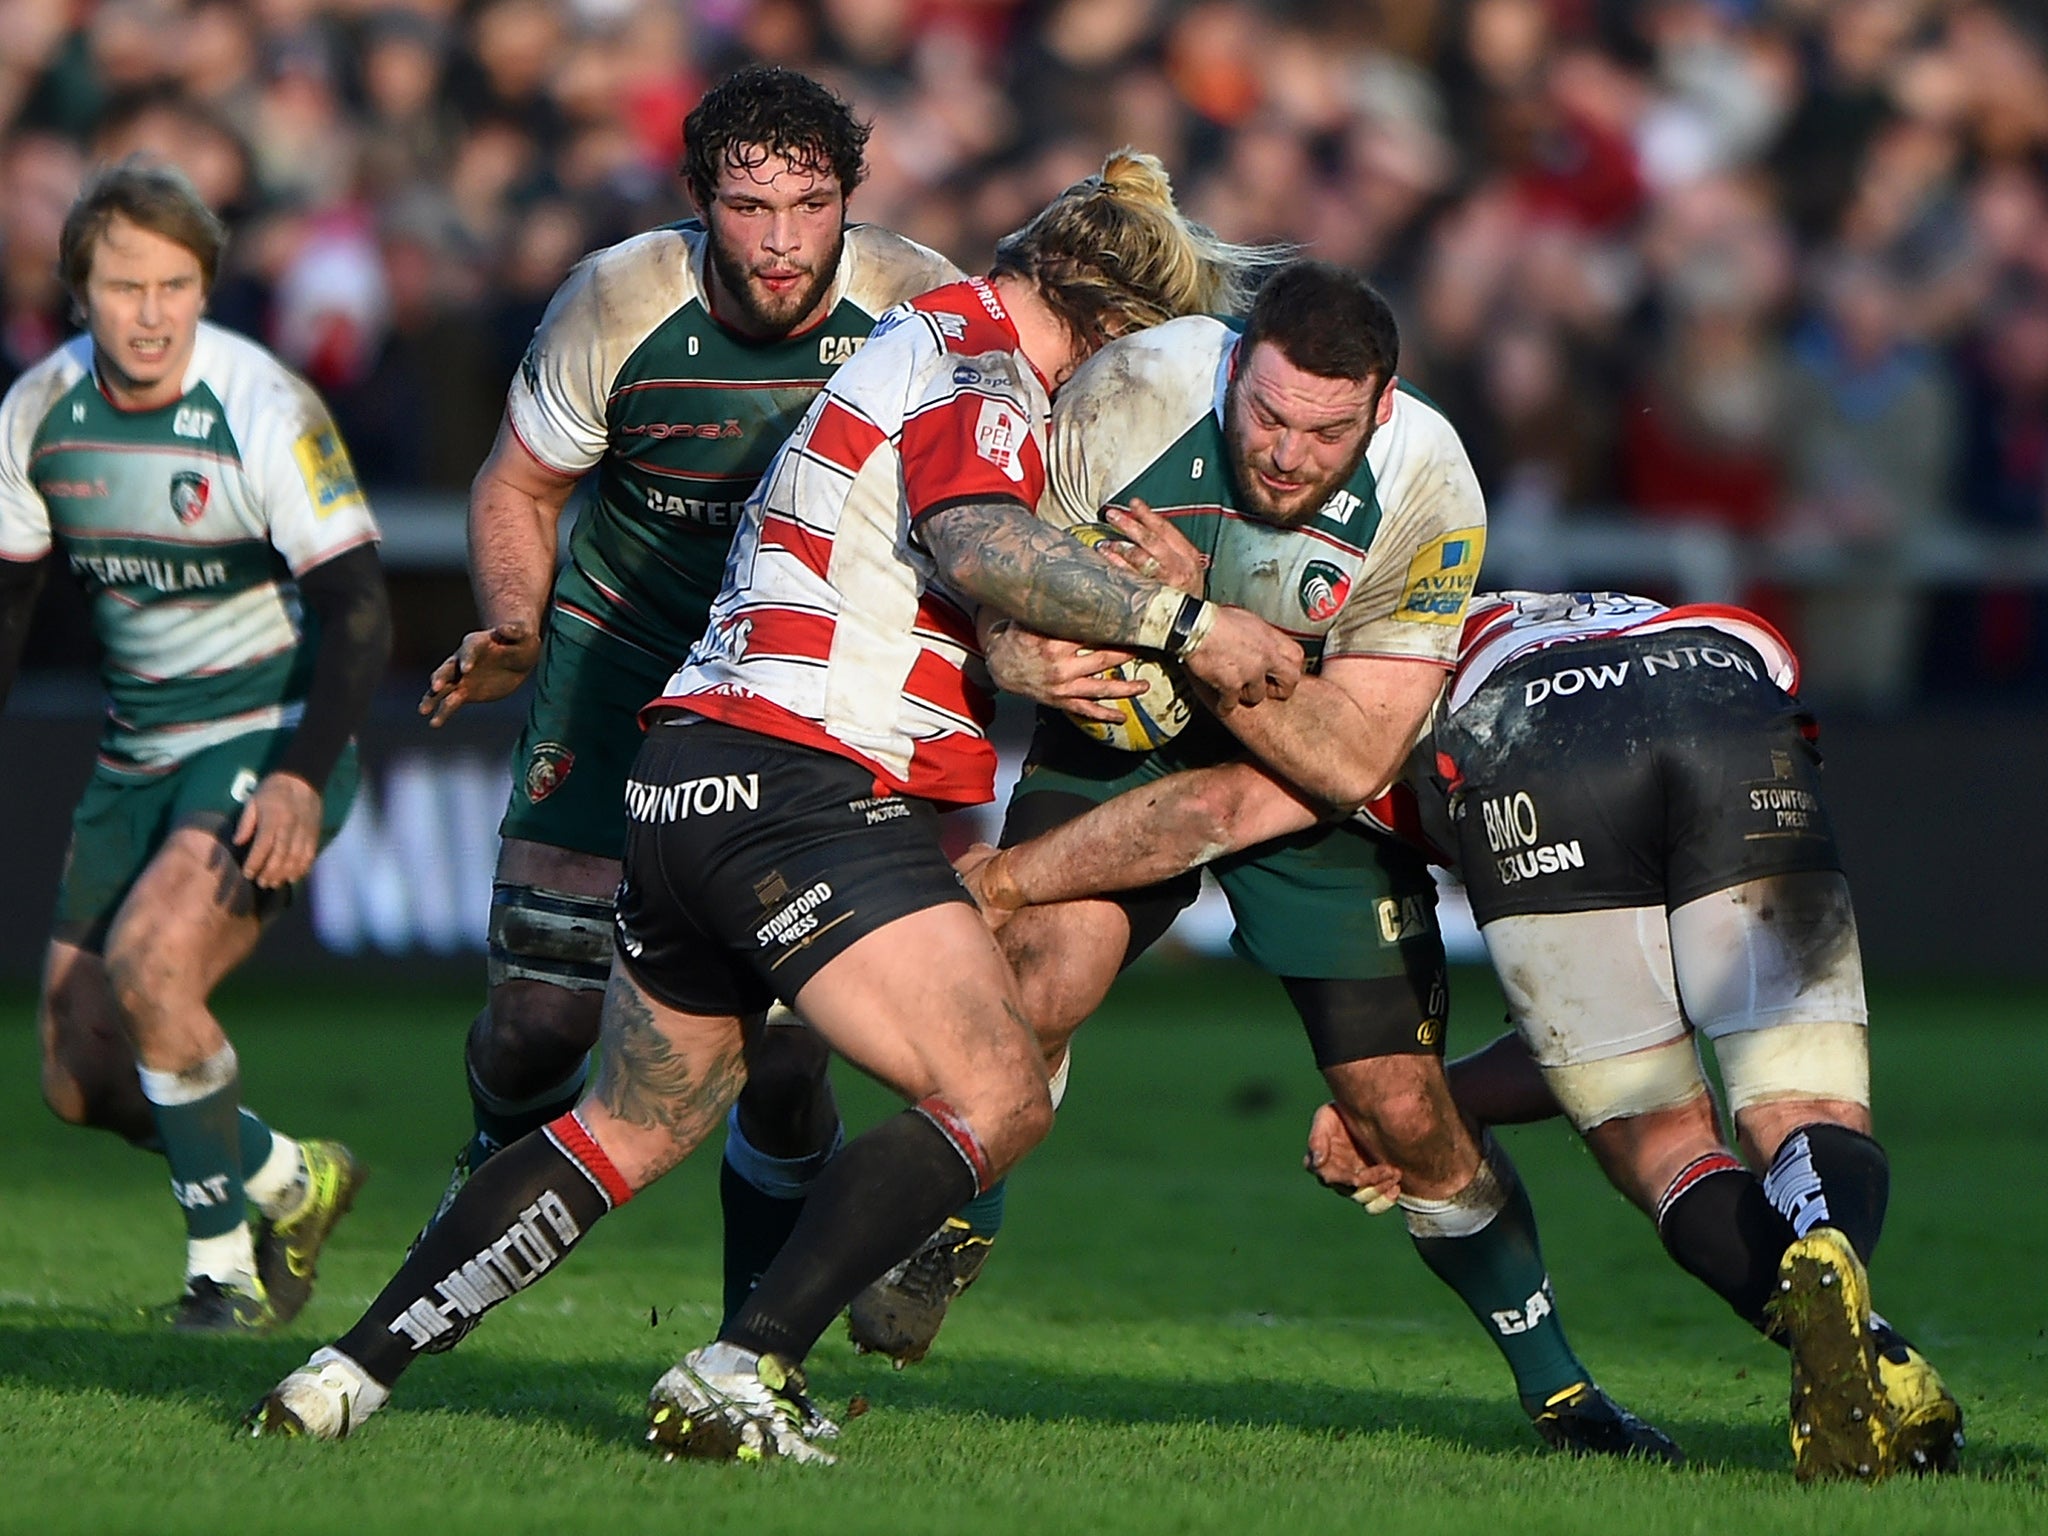 Greg Bateman of Leicester Tigers in action during the Aviva Premiership match against Gloucester Rugby